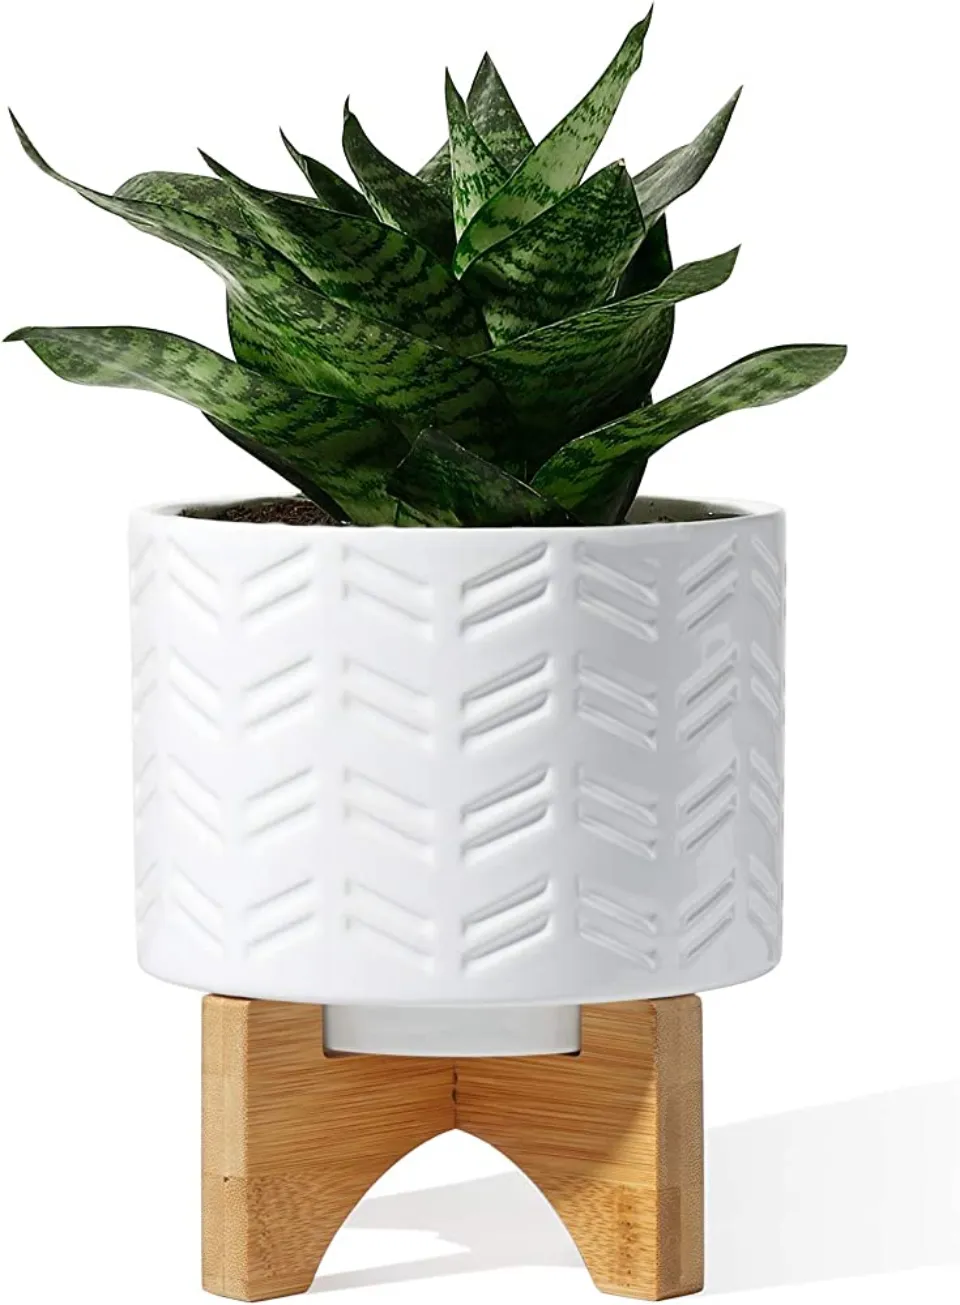 Best with Stand: Potey Mid Century Ceramic Pot With Wood Stand